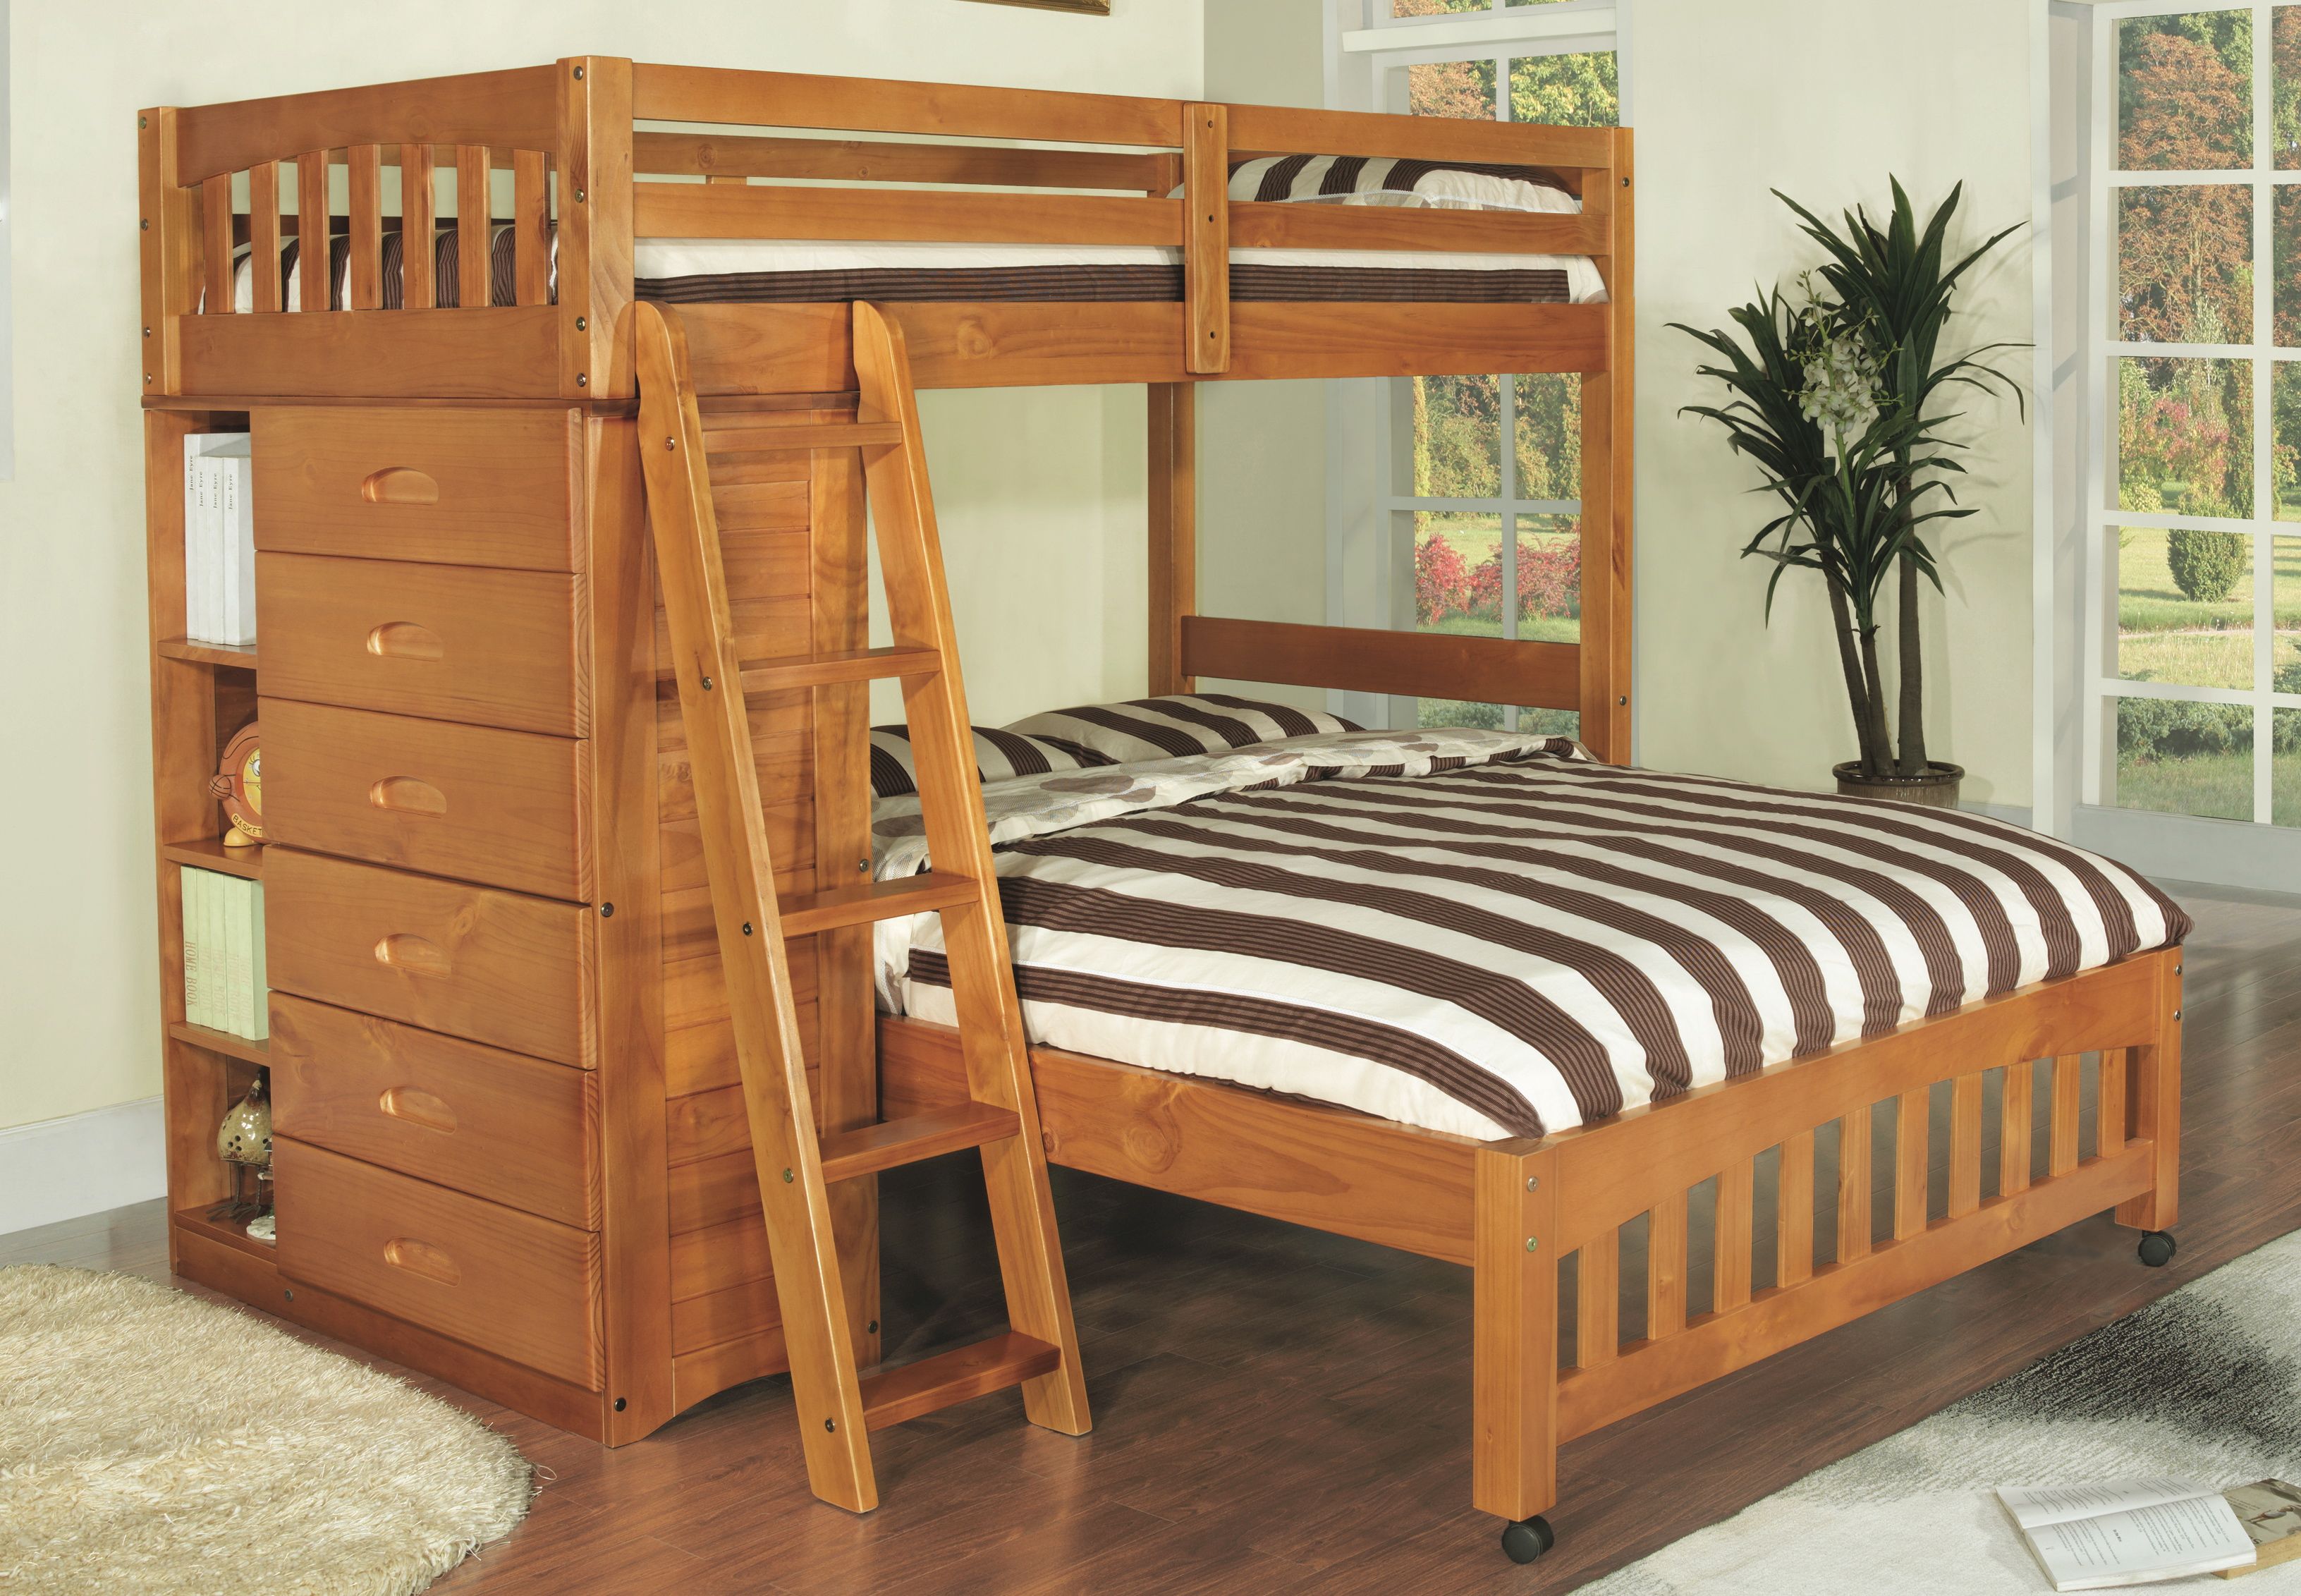 Honey Loft Bunk Beds, Canyon Furniture Company Twin Step Bunk Bed